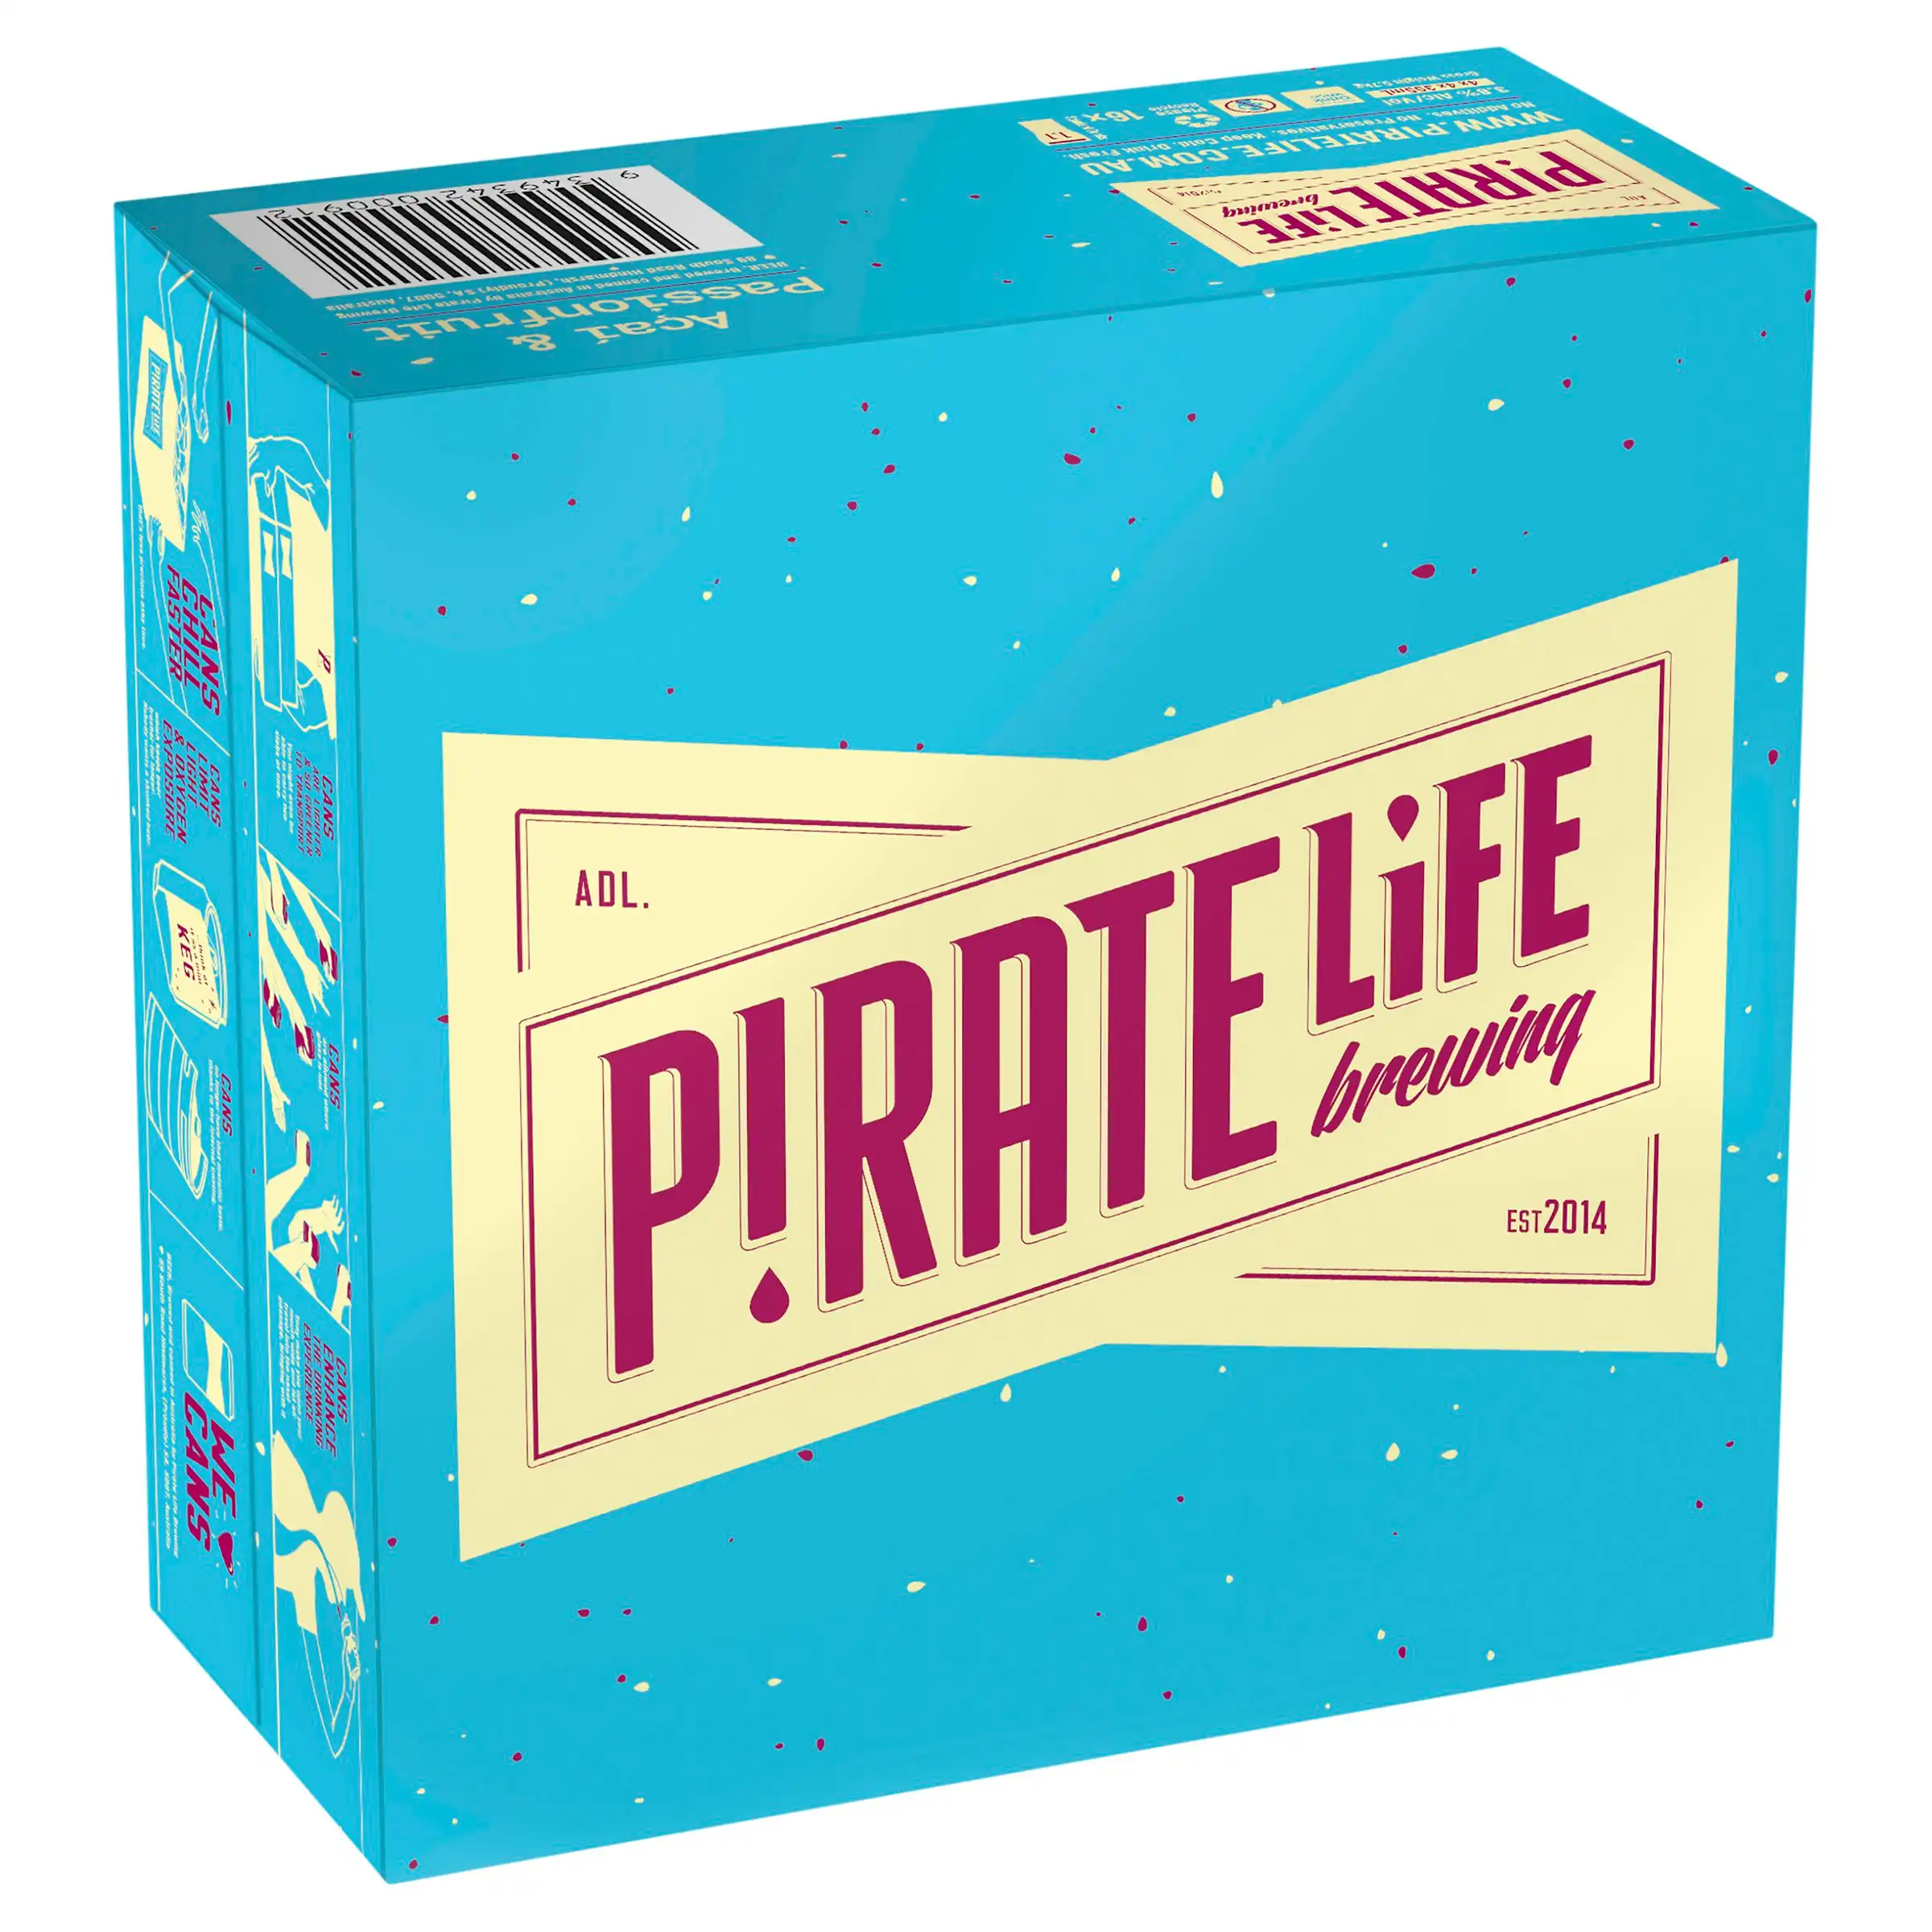 Pirate Life Brewing Acai & Passionfruit Beer Case 16 x 355mL Cans